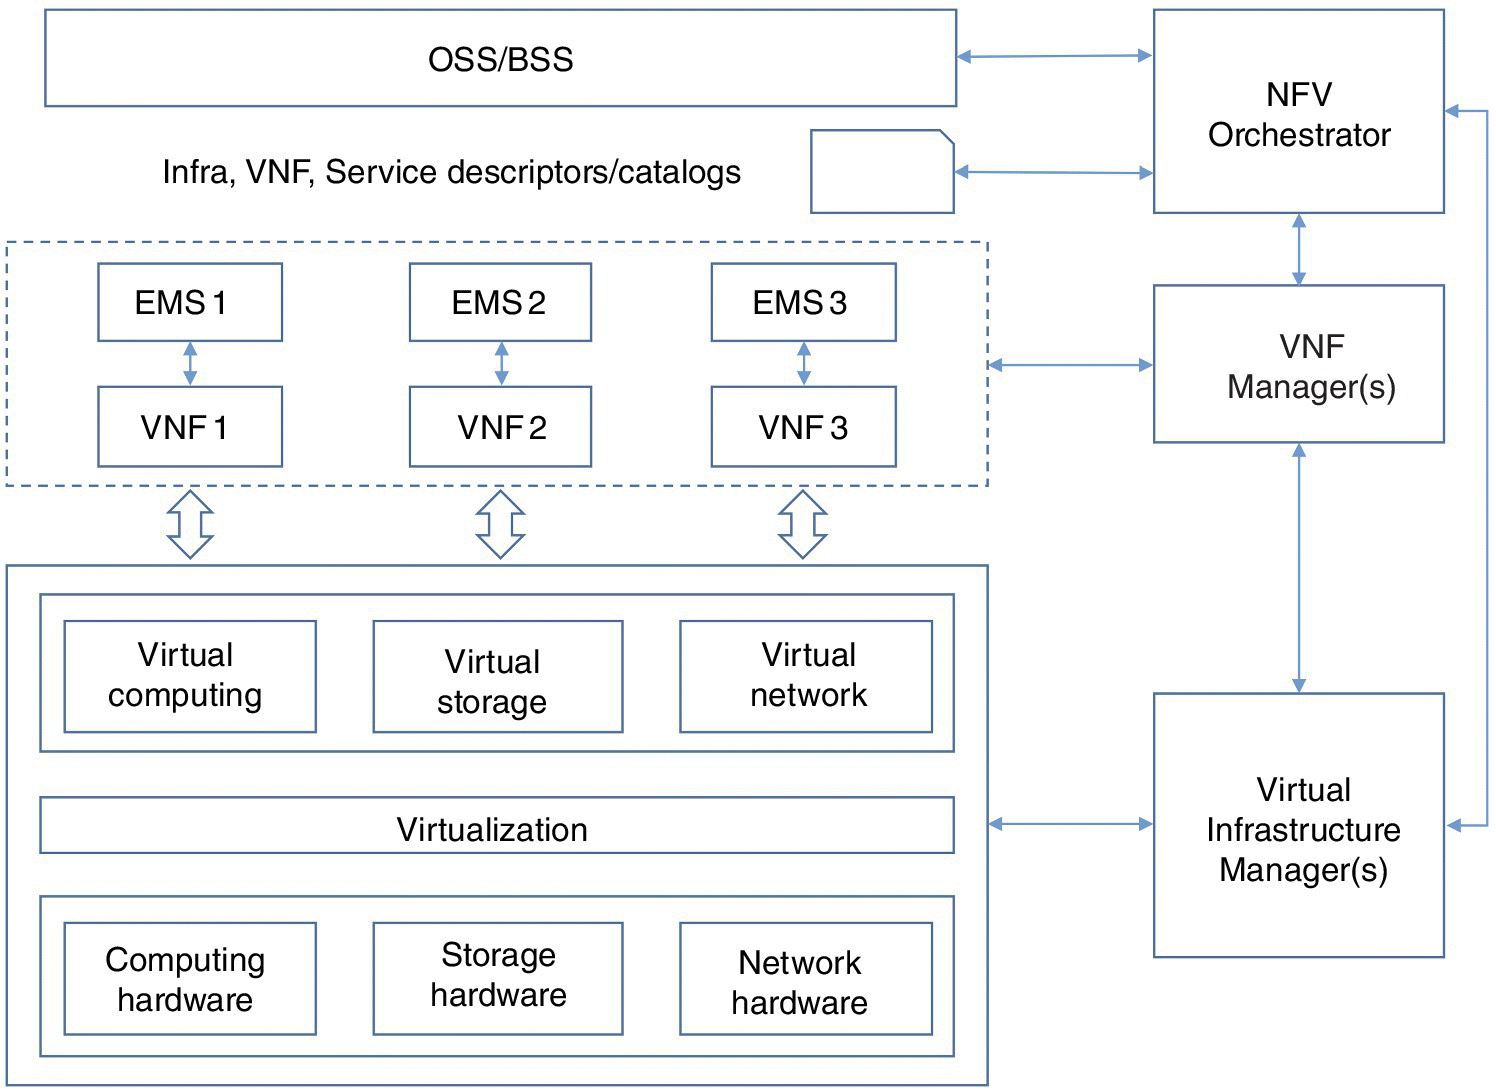 ETSI NFV reference framework displaying interconnected boxes labeled OSS/BSS, NFV orchestrator, VNF manager(s), virtual infrastructure manager(s), network hardware, virtualization, EMS 1, etc.